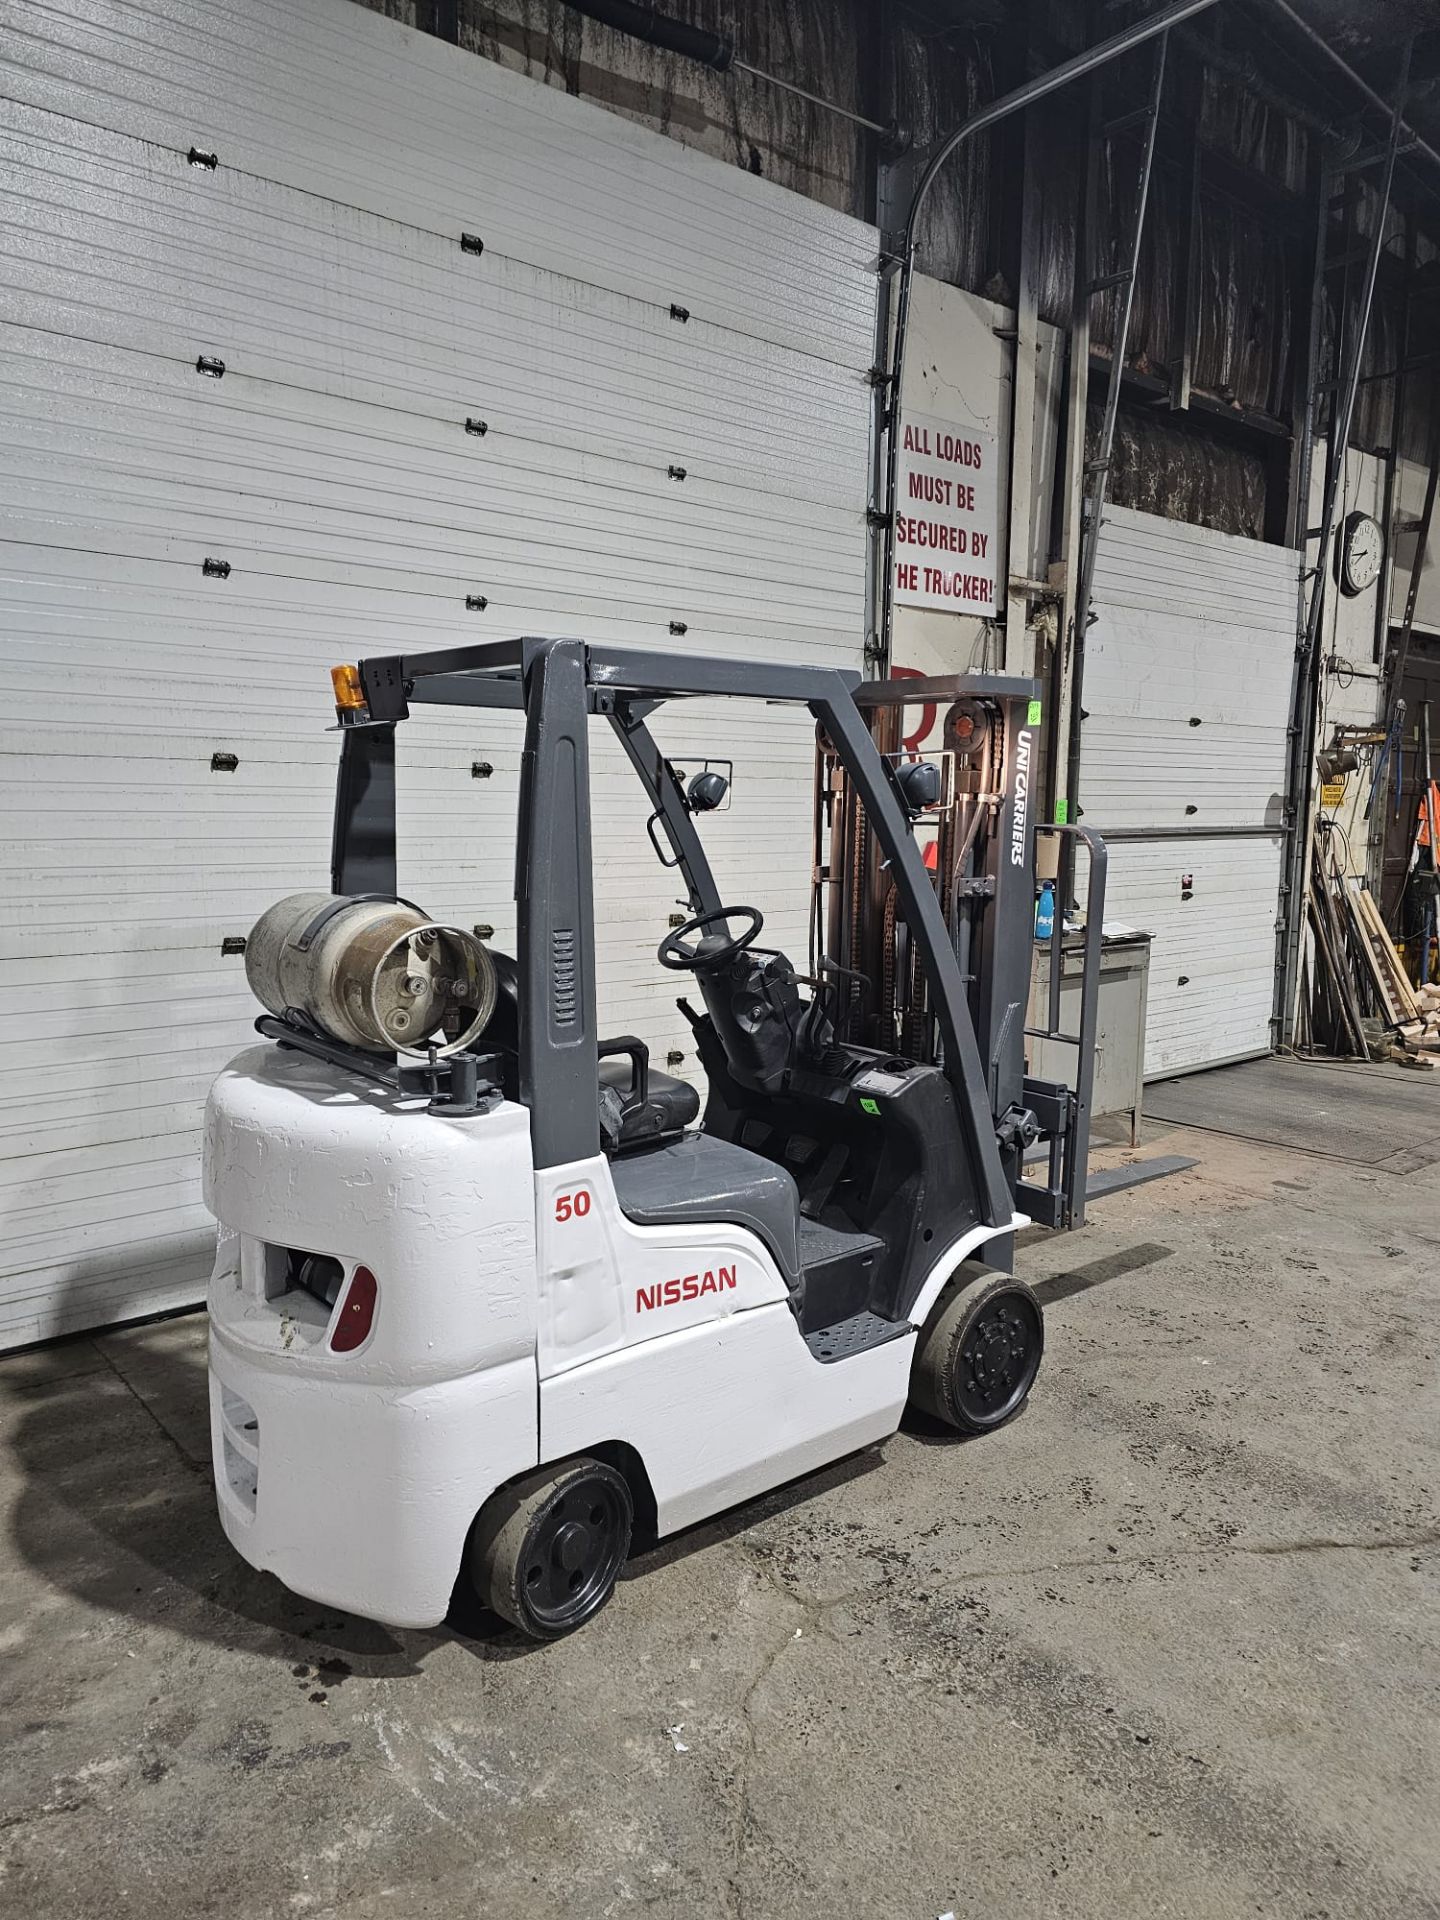 2013 Nissan 5000lbs Capacity LPG (Propane) Forklift 3-STAGE MAST with sideshift (no propane tank - Image 2 of 5